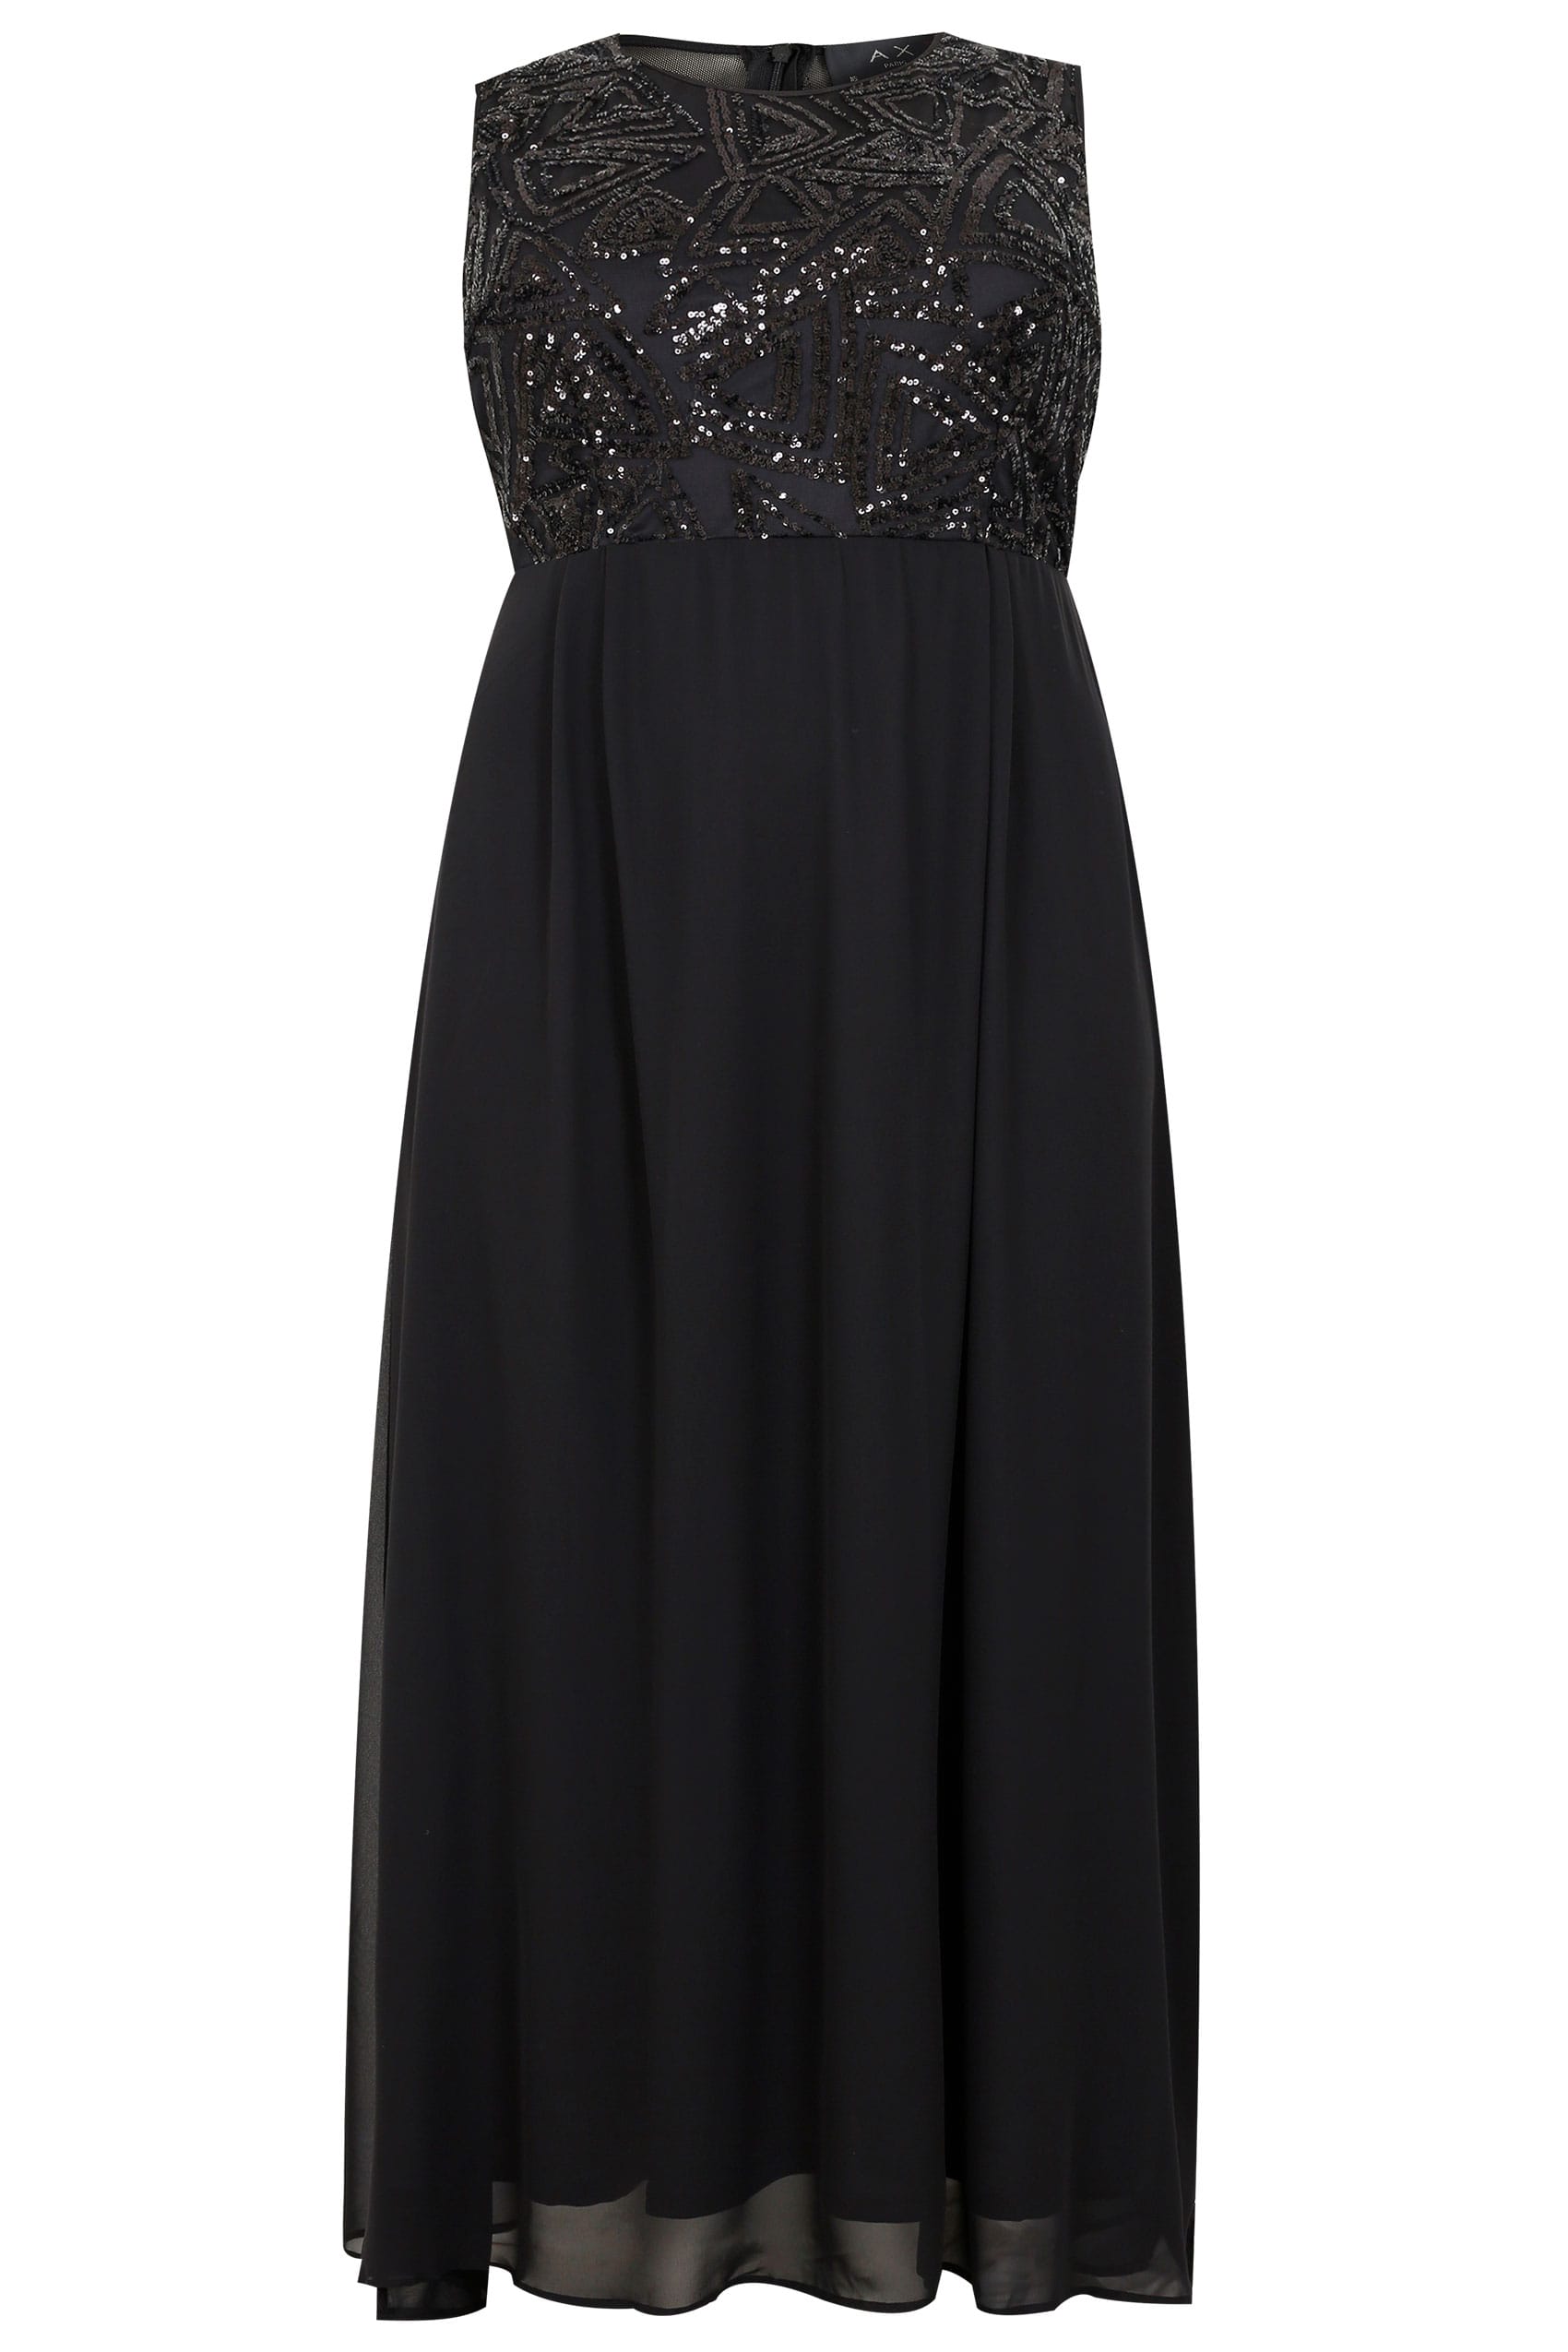 Ax Paris Curve Black Chiffon Maxi Dress With Embellished Sequin Bodice Plus Size 16 To